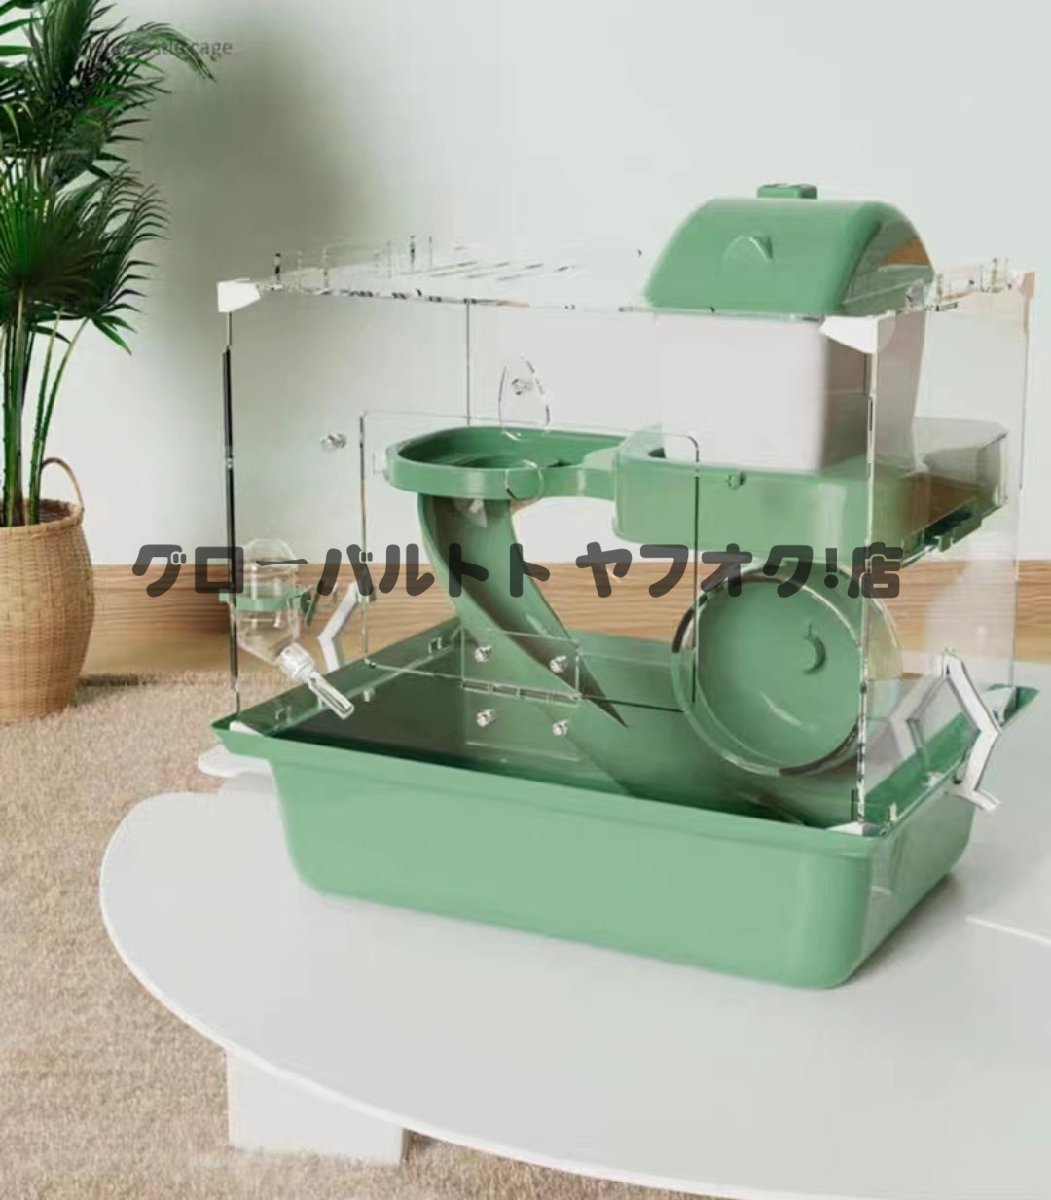  super popular hamster cage construction type small animals for breeding set 2 storey building transparent cage plastic case house tableware hamster wheel waterer hamster house breeding case S589